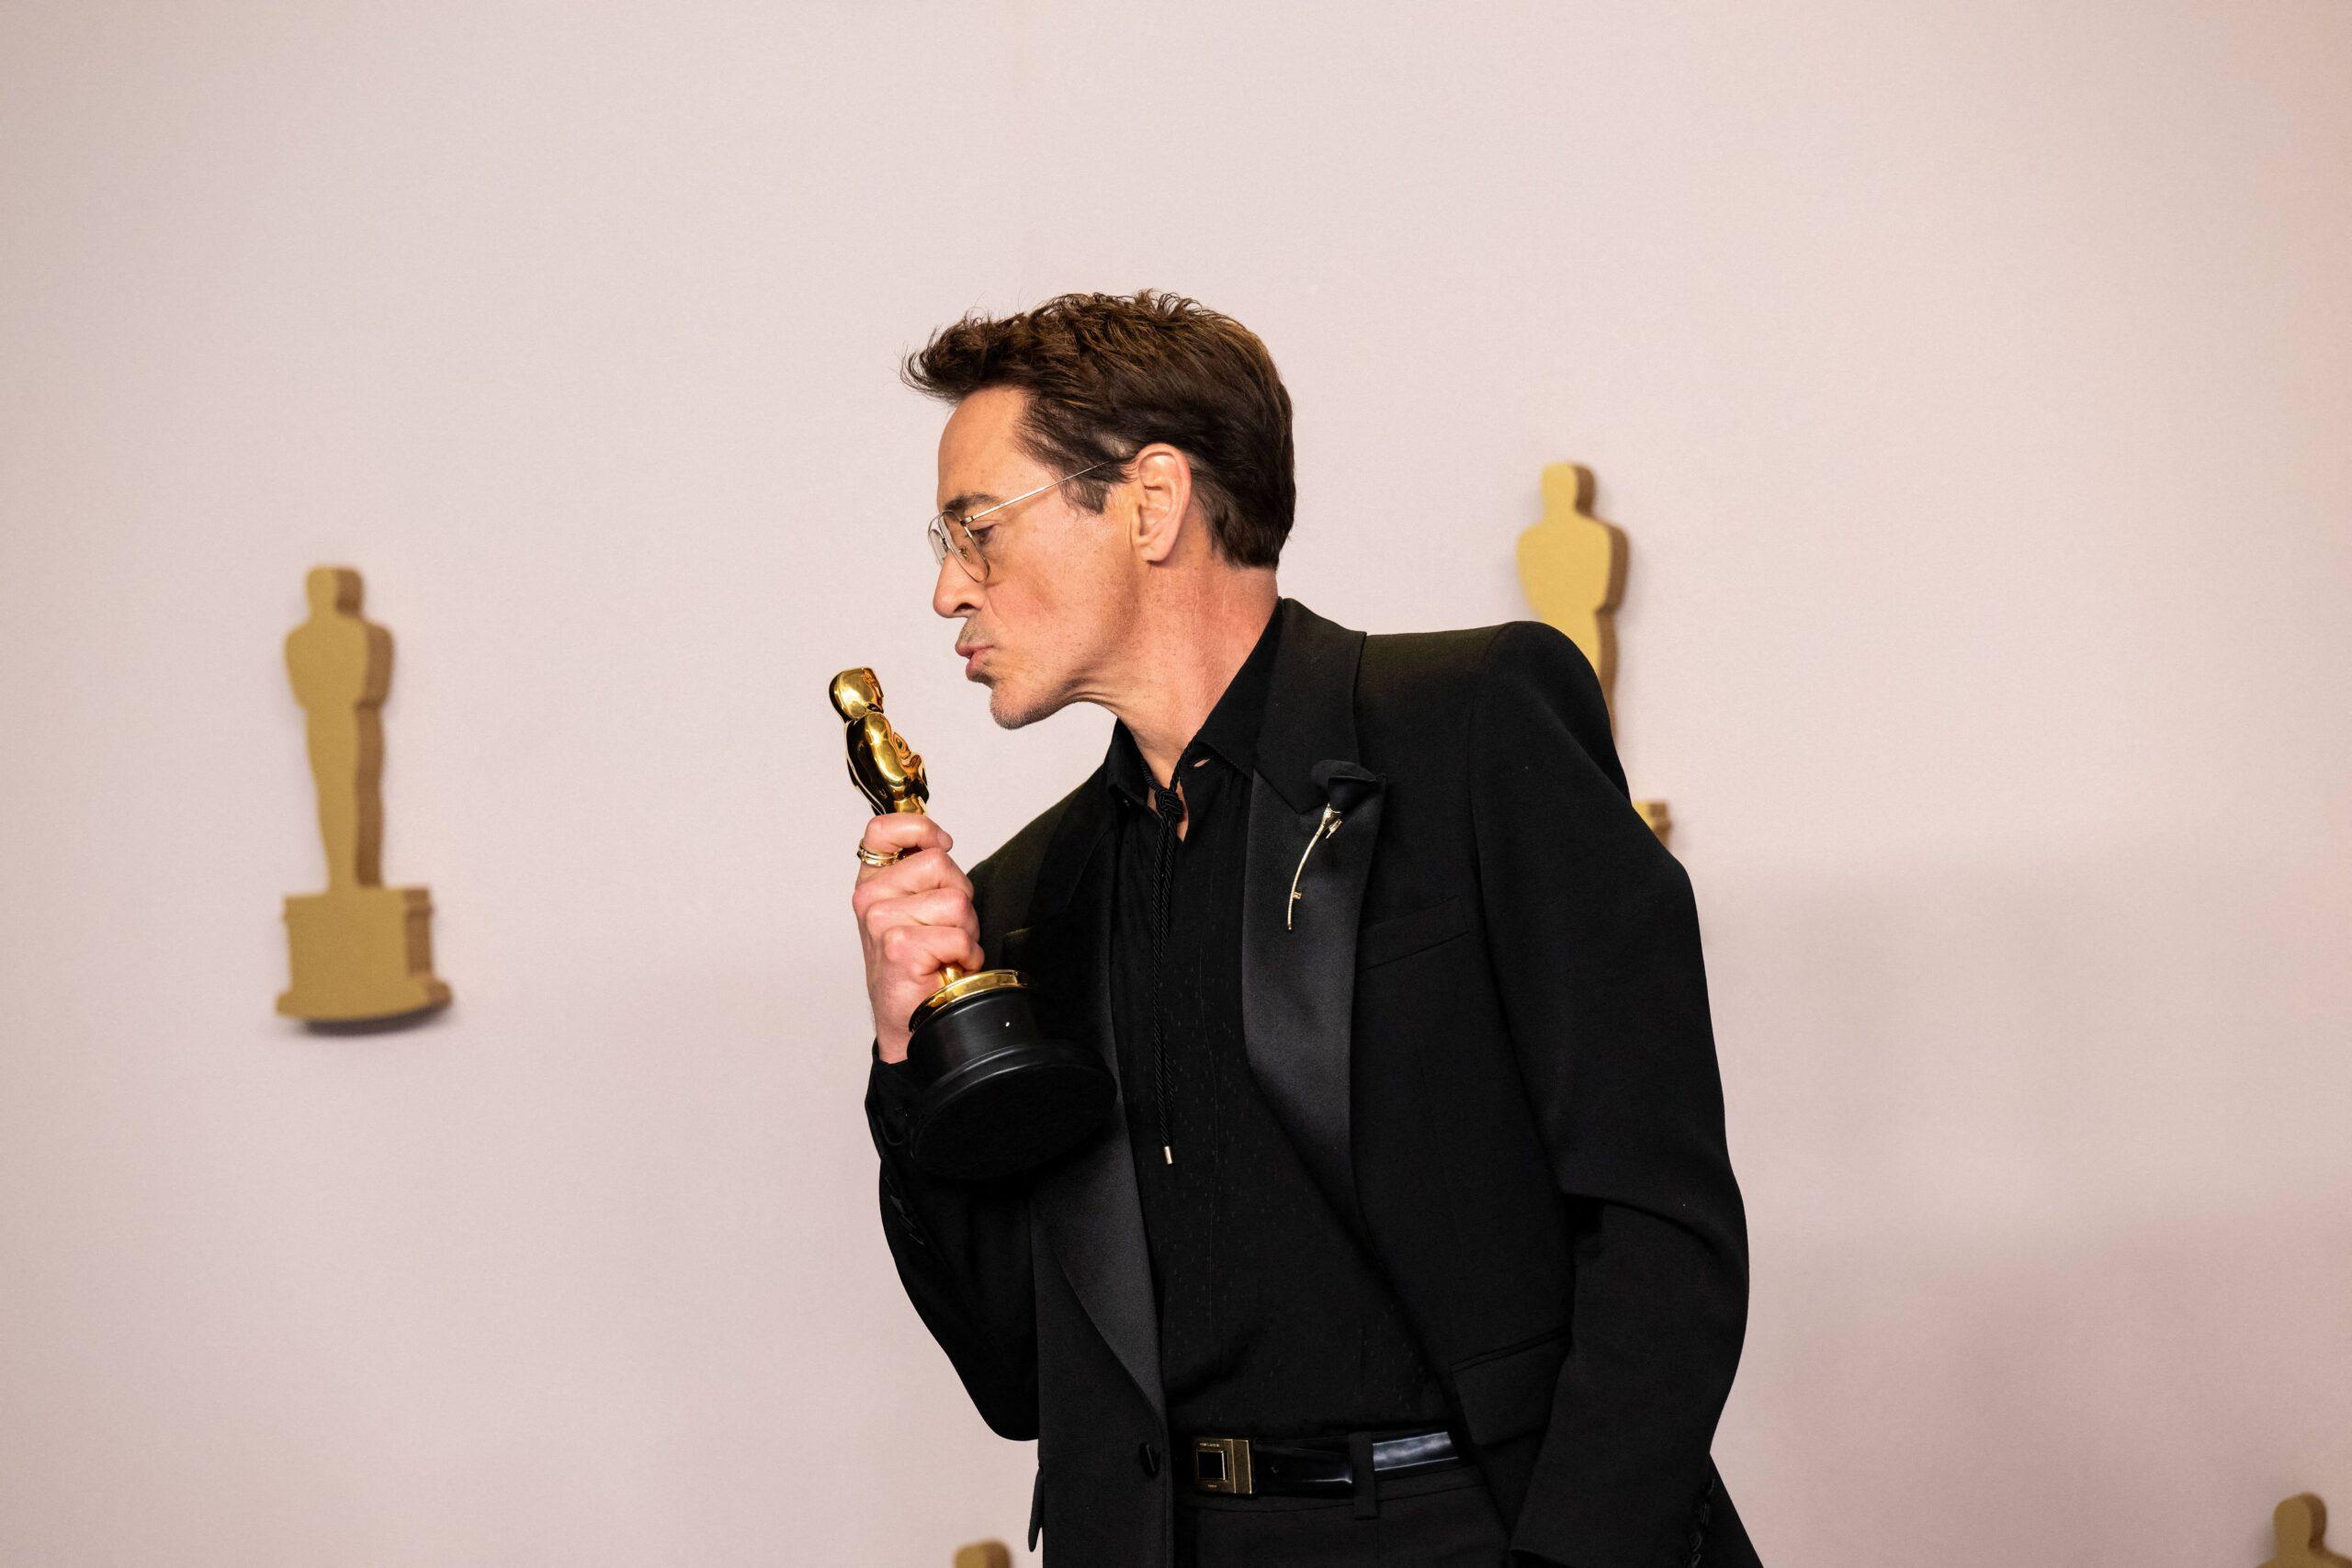 Robert Downey Jr. poses backstage at the Oscars